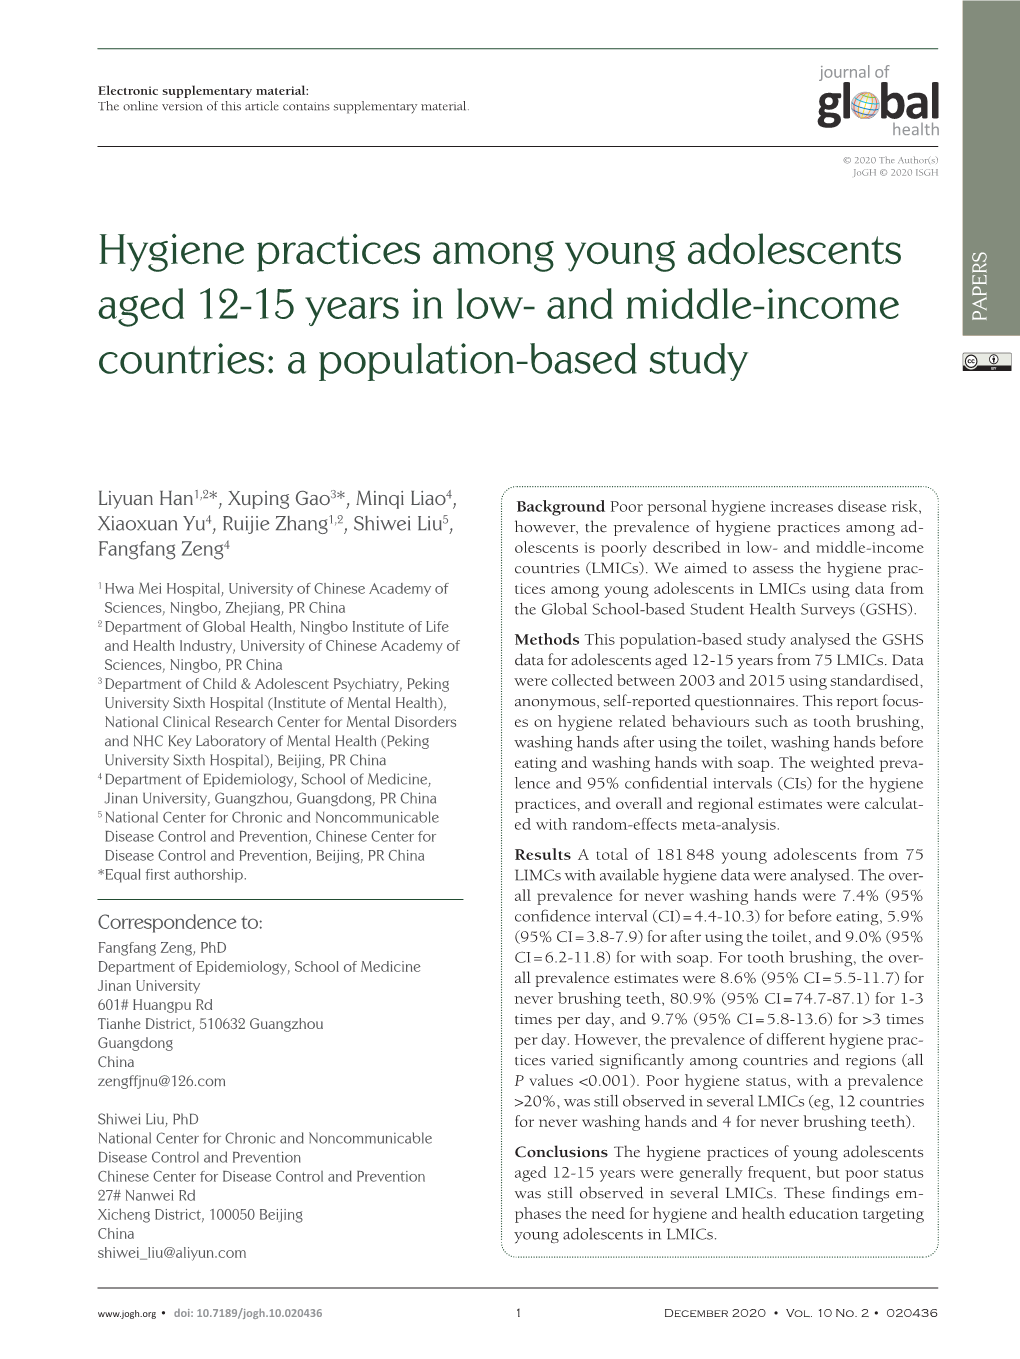 Hygiene Practices Among Young Adolescents Aged 12-15 Years In